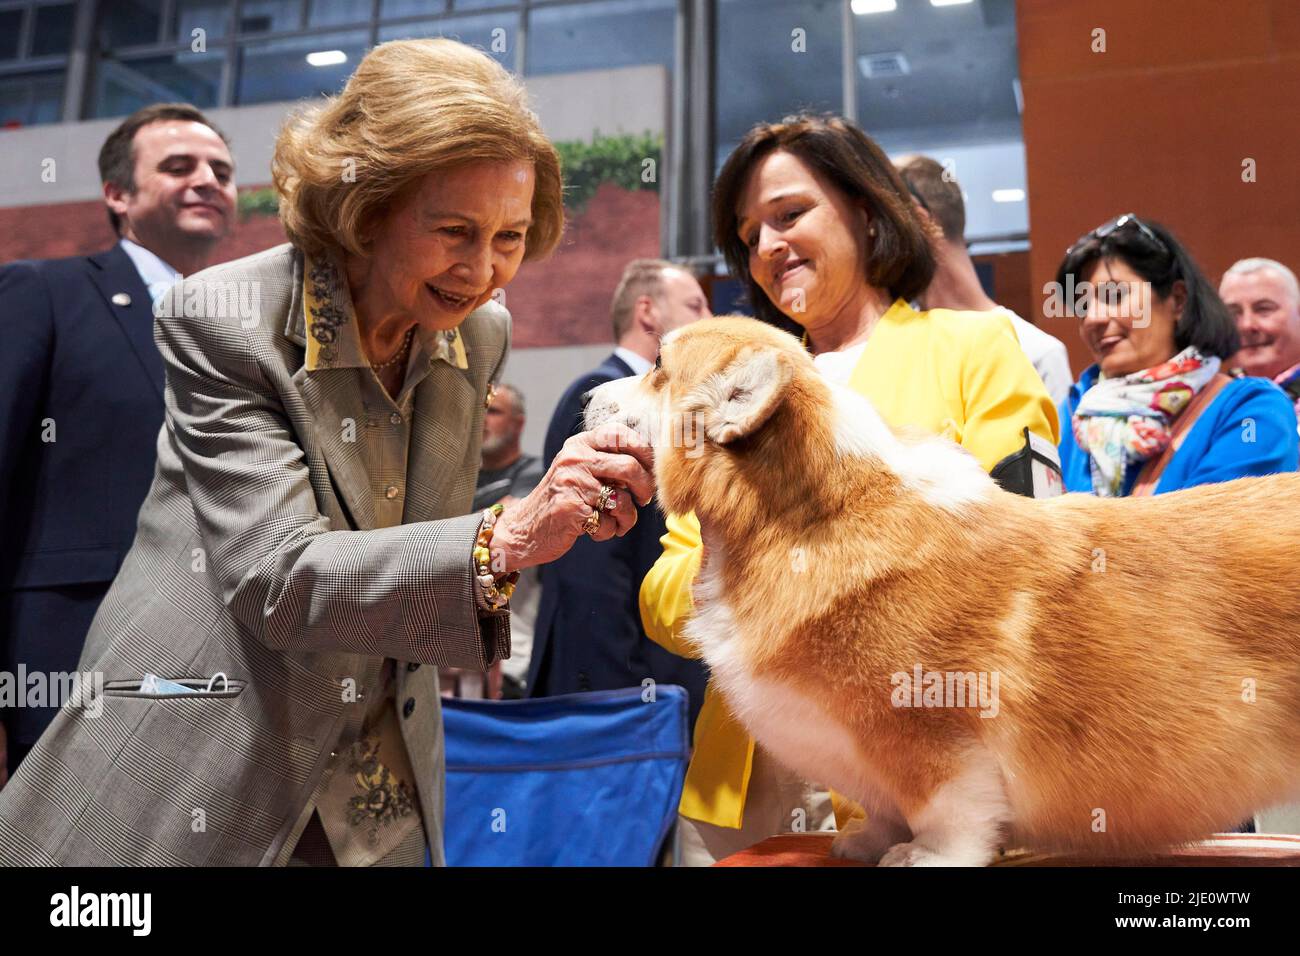 Madrid. Spain. 20220624,  The former Queen Sofia attends  the opening of the World Dog Show trade fair at IFEMA on June 24, 2022 in Madrid, Spain   In the pic, The former Queen Sofia caresses and takes interest in Pembroke Welsh Corgi the same breed of the dogs of Queen Elizabeth II of the United Kingdom of Great Britain and Northern Ireland Stock Photo